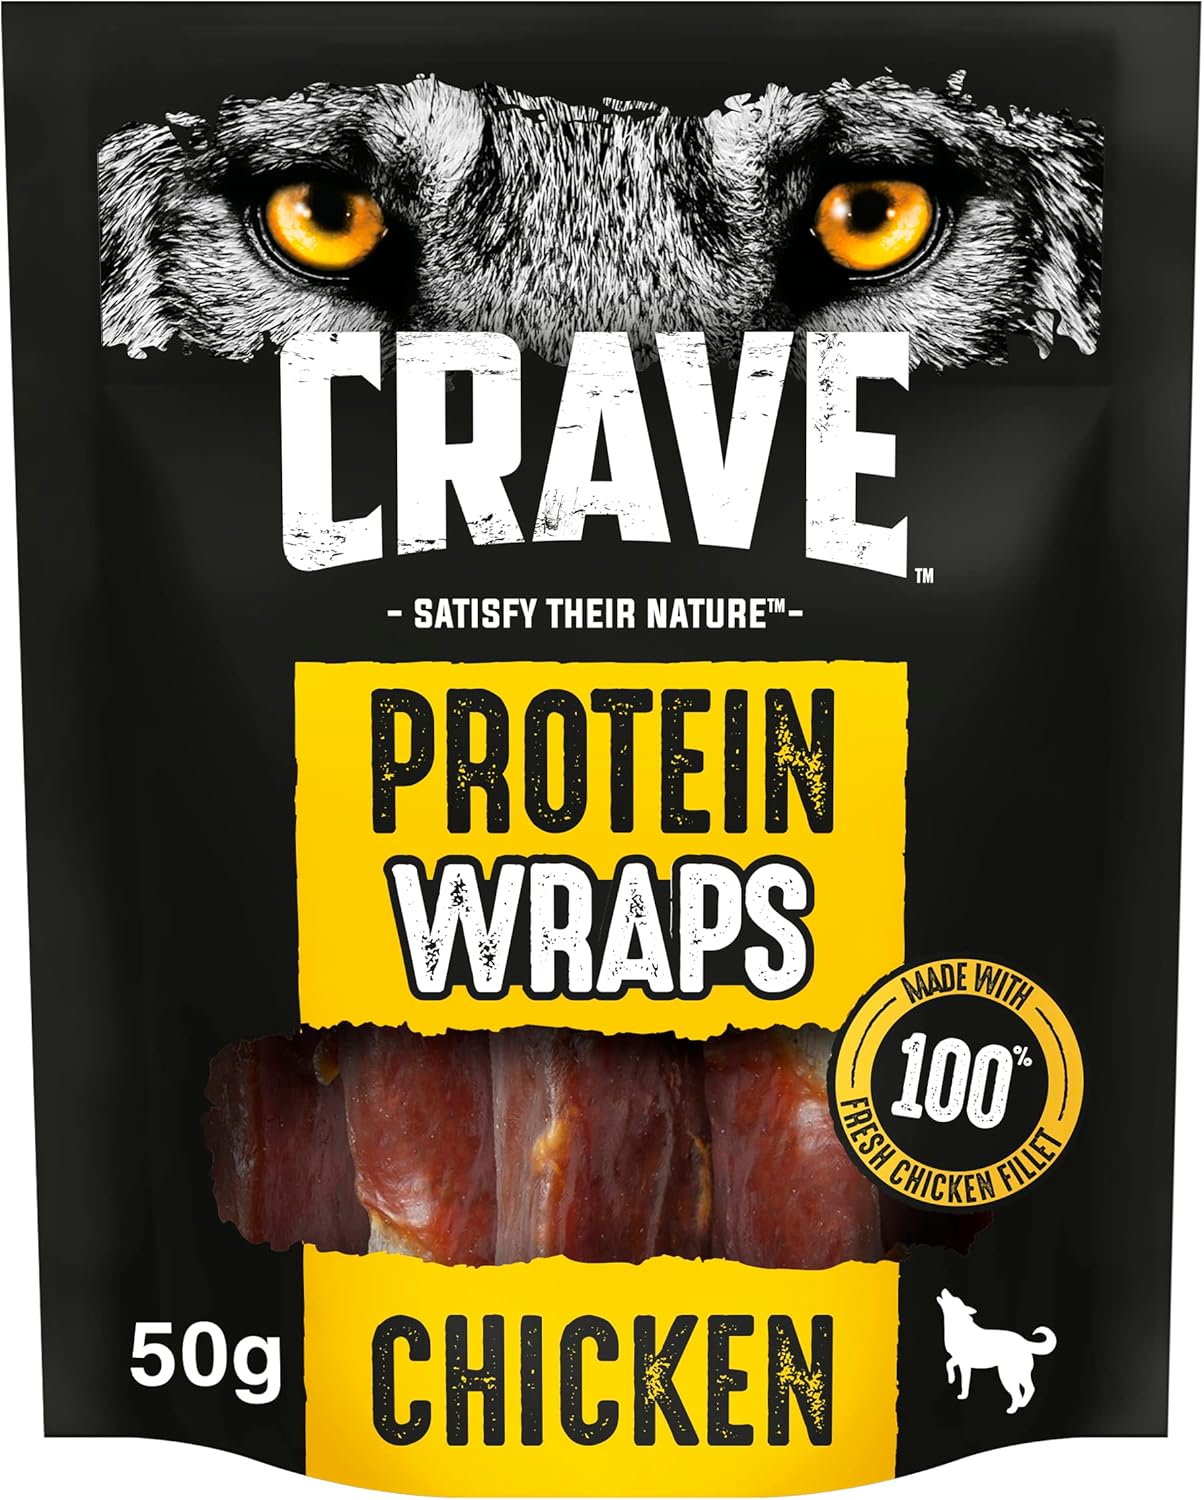 Crave Wraps - Dog Treats - for Adult Dogs - Protein Wraps with Chicken - 10 x 50 g?425284